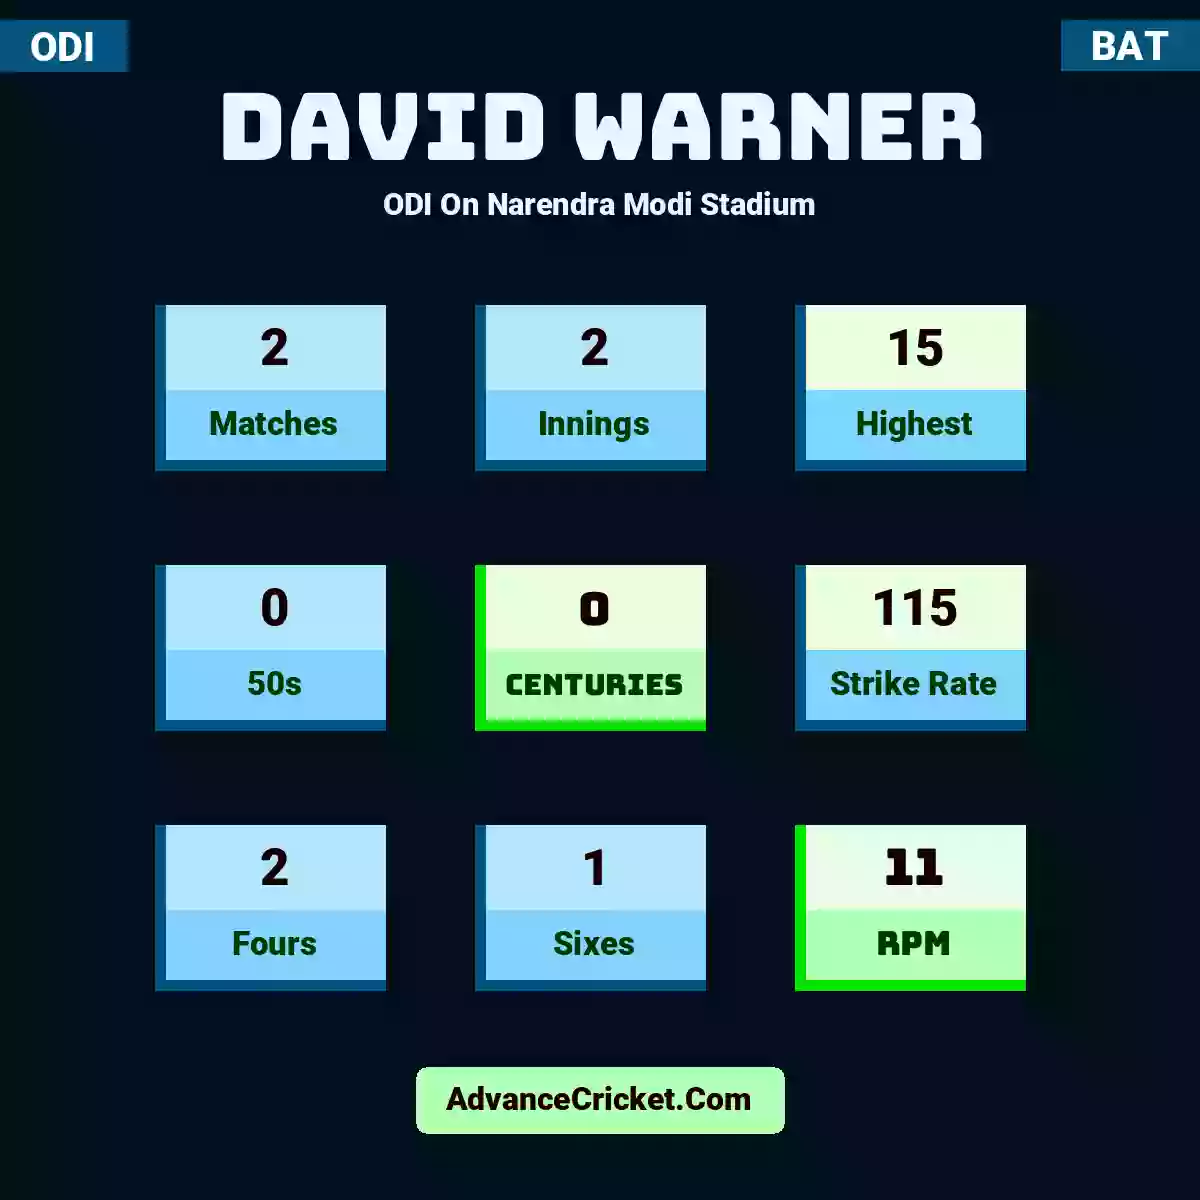 David Warner ODI  On Narendra Modi Stadium, David Warner played 2 matches, scored 15 runs as highest, 0 half-centuries, and 0 centuries, with a strike rate of 115. D.Warner hit 2 fours and 1 sixes, with an RPM of 11.